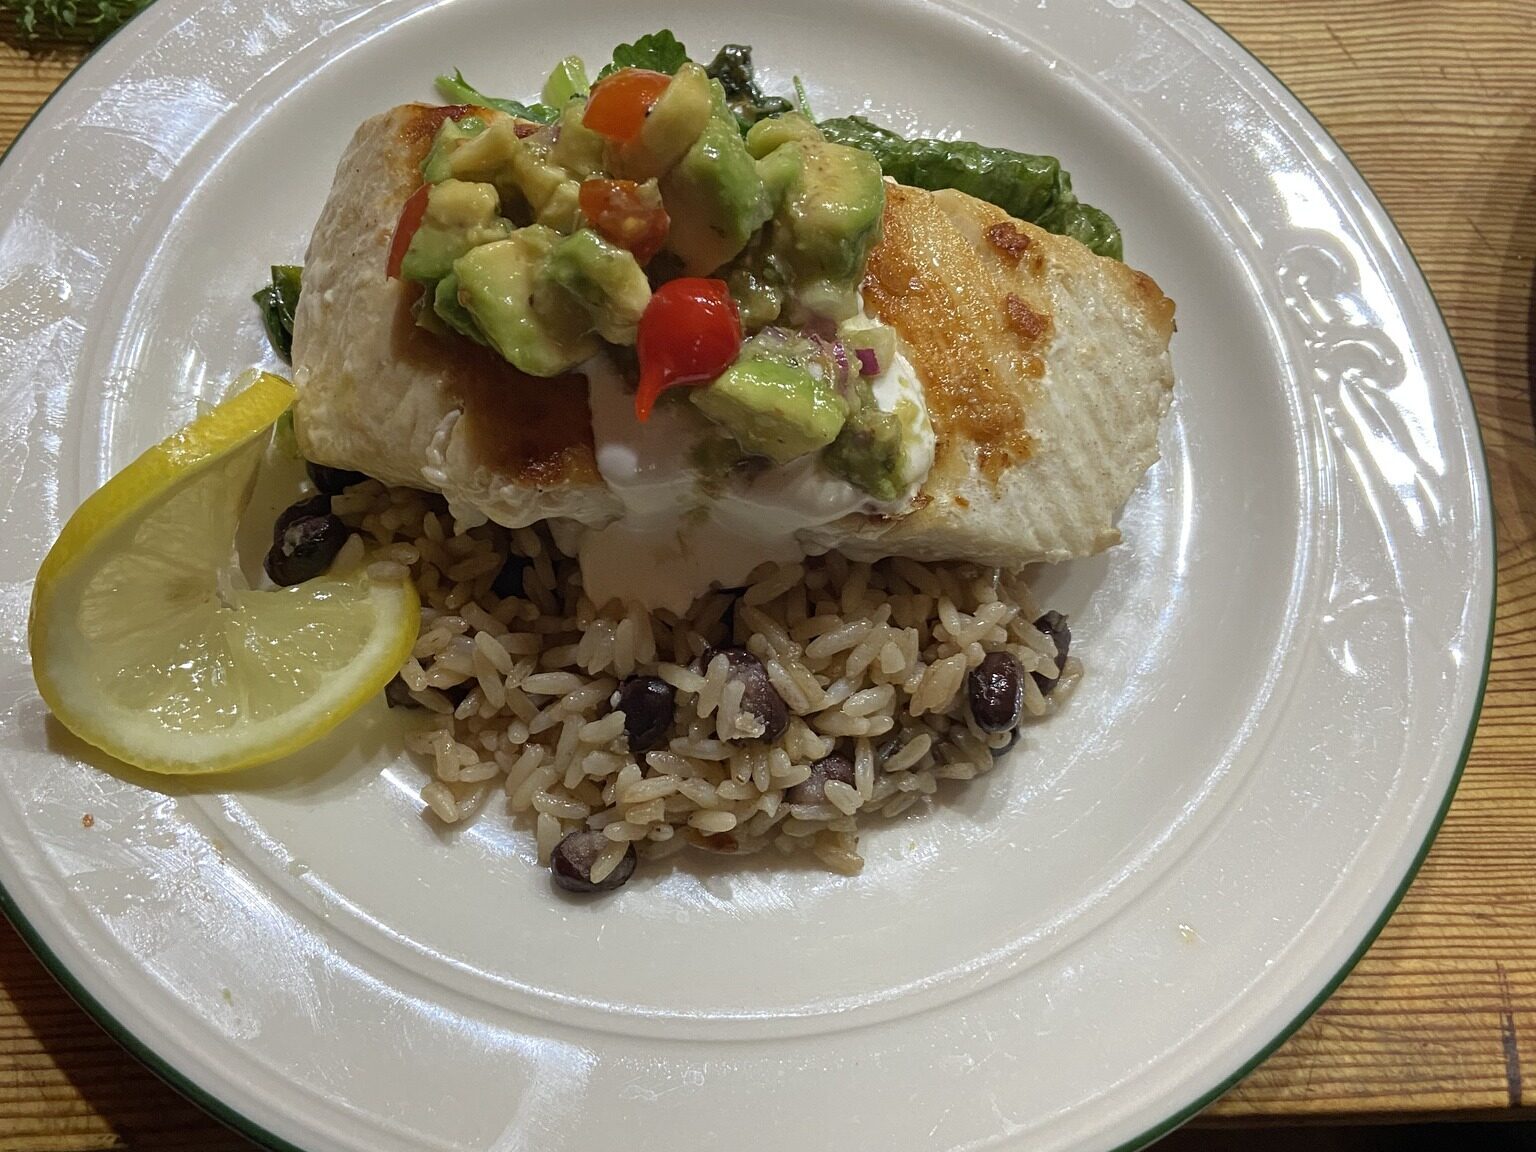 seared halibut topped with avocado on a bed of rice and beans with a lemon garnish